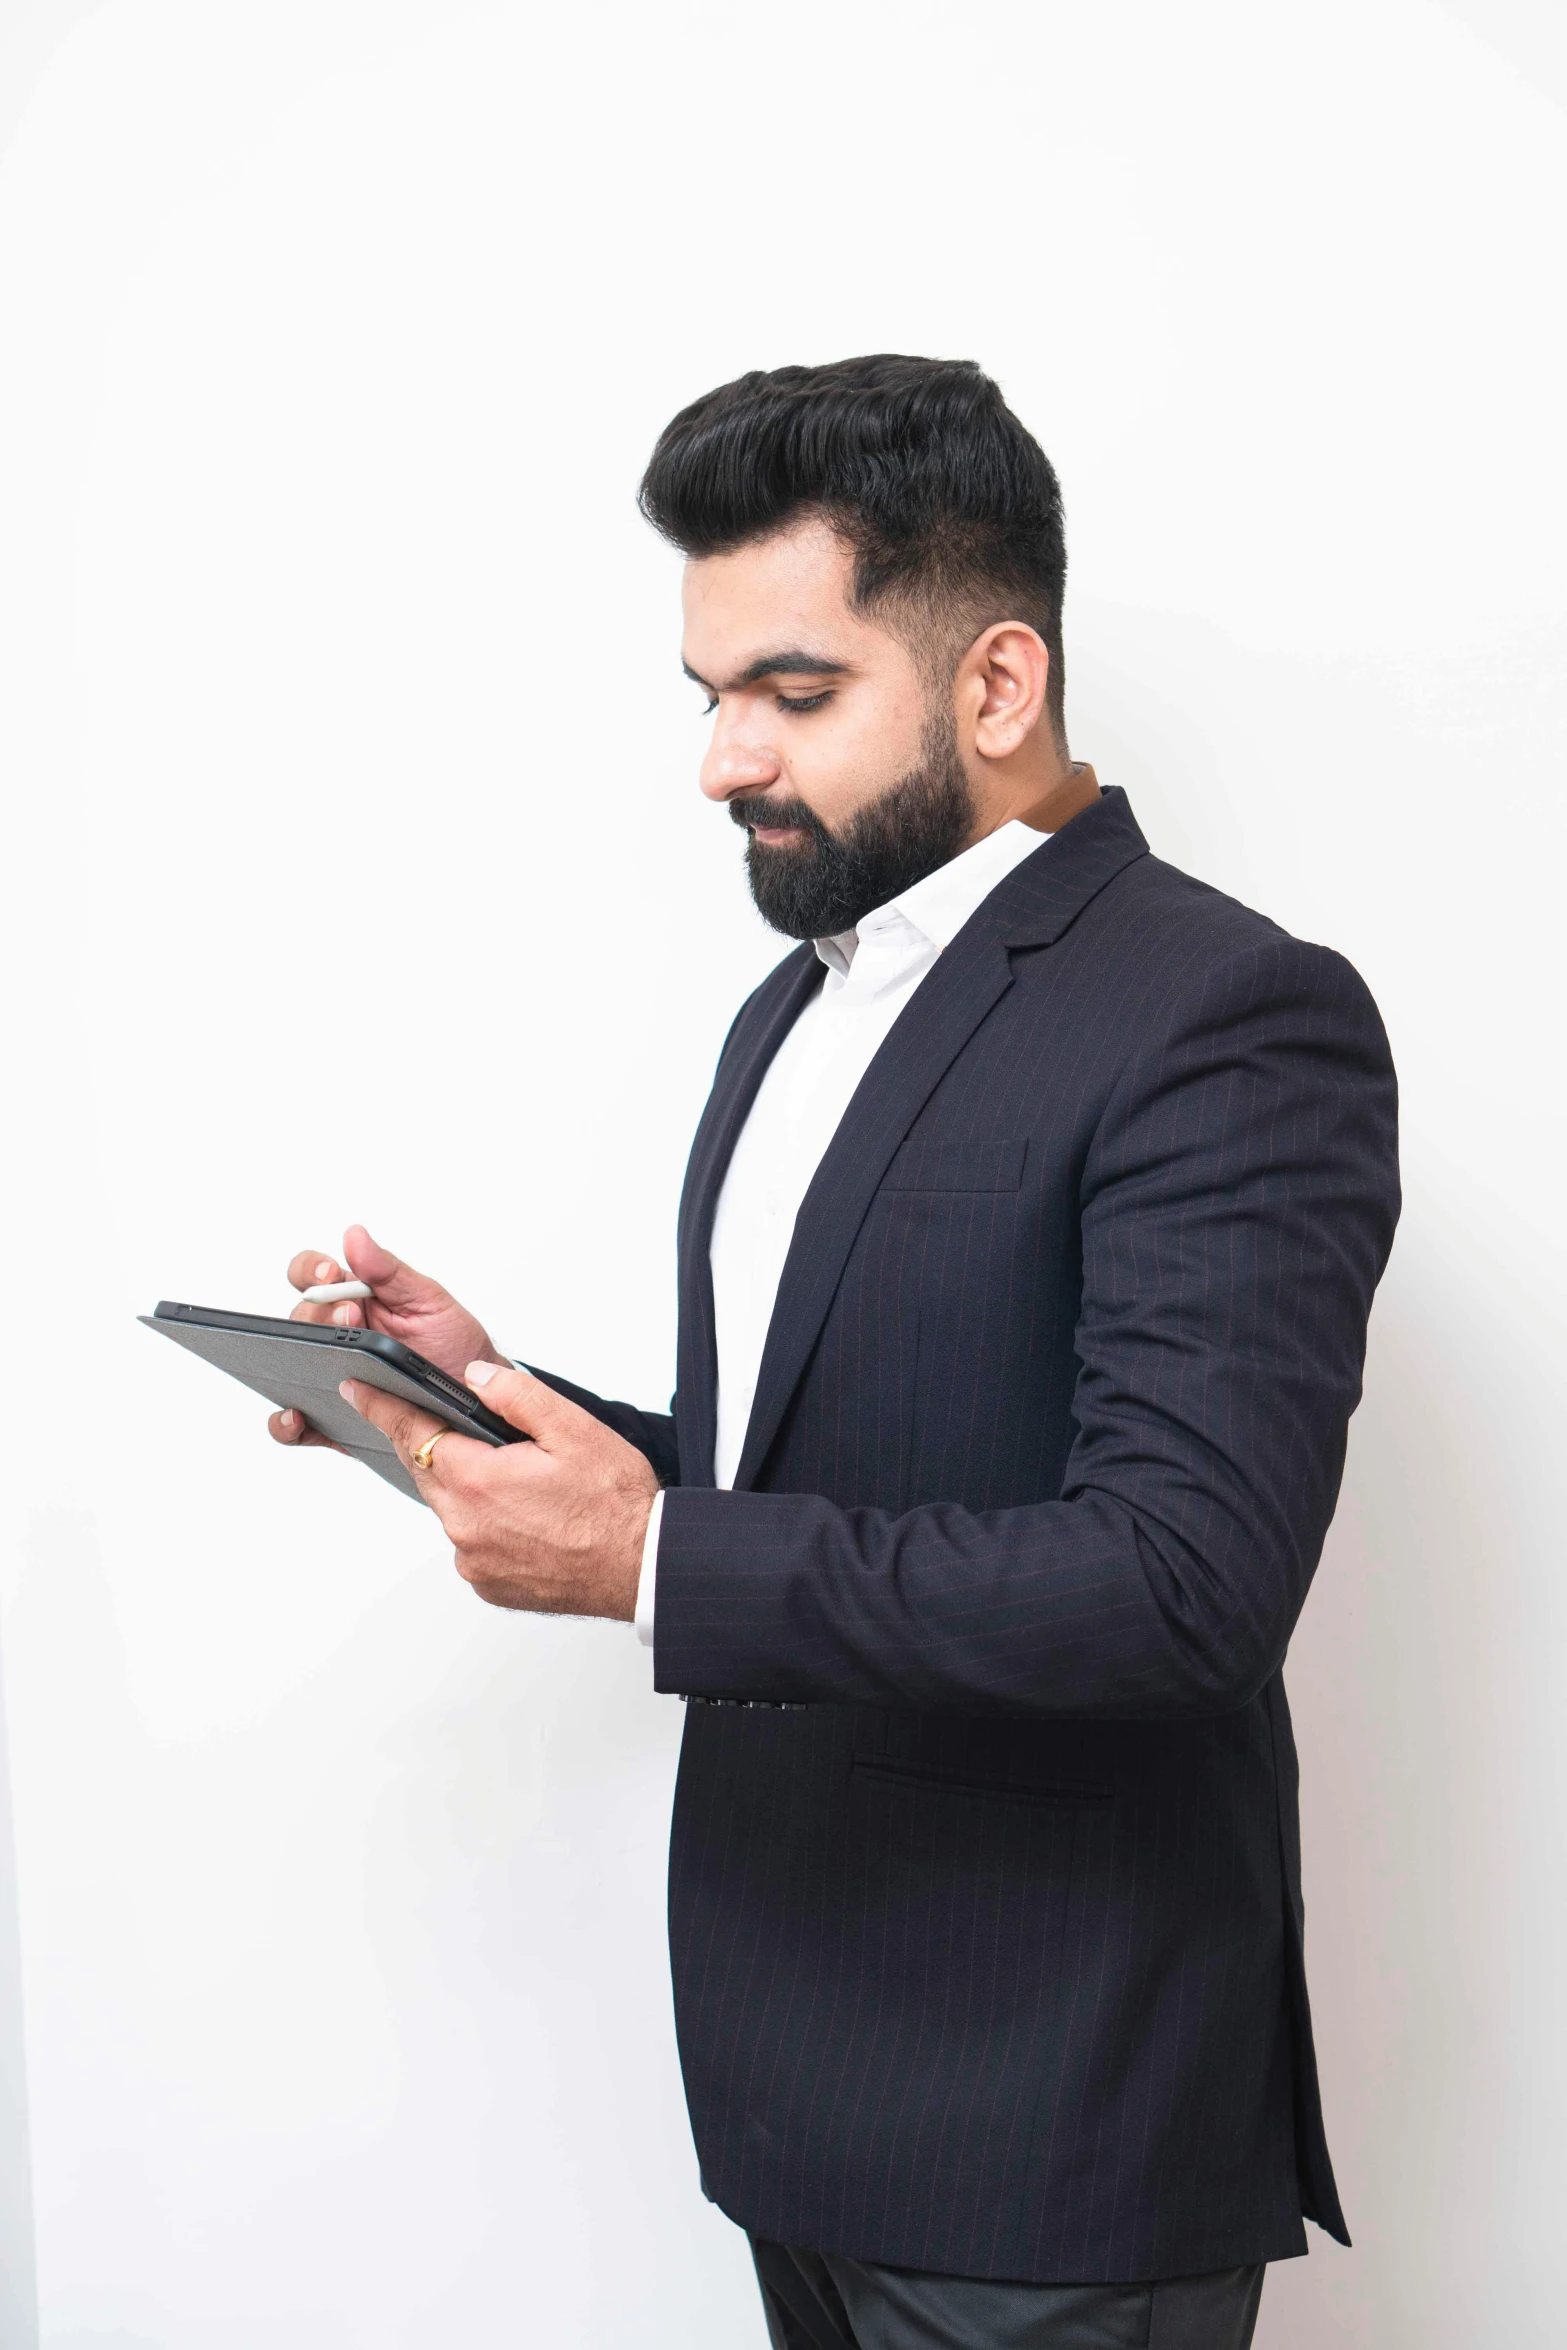 a man in a suit is holding an electronic device